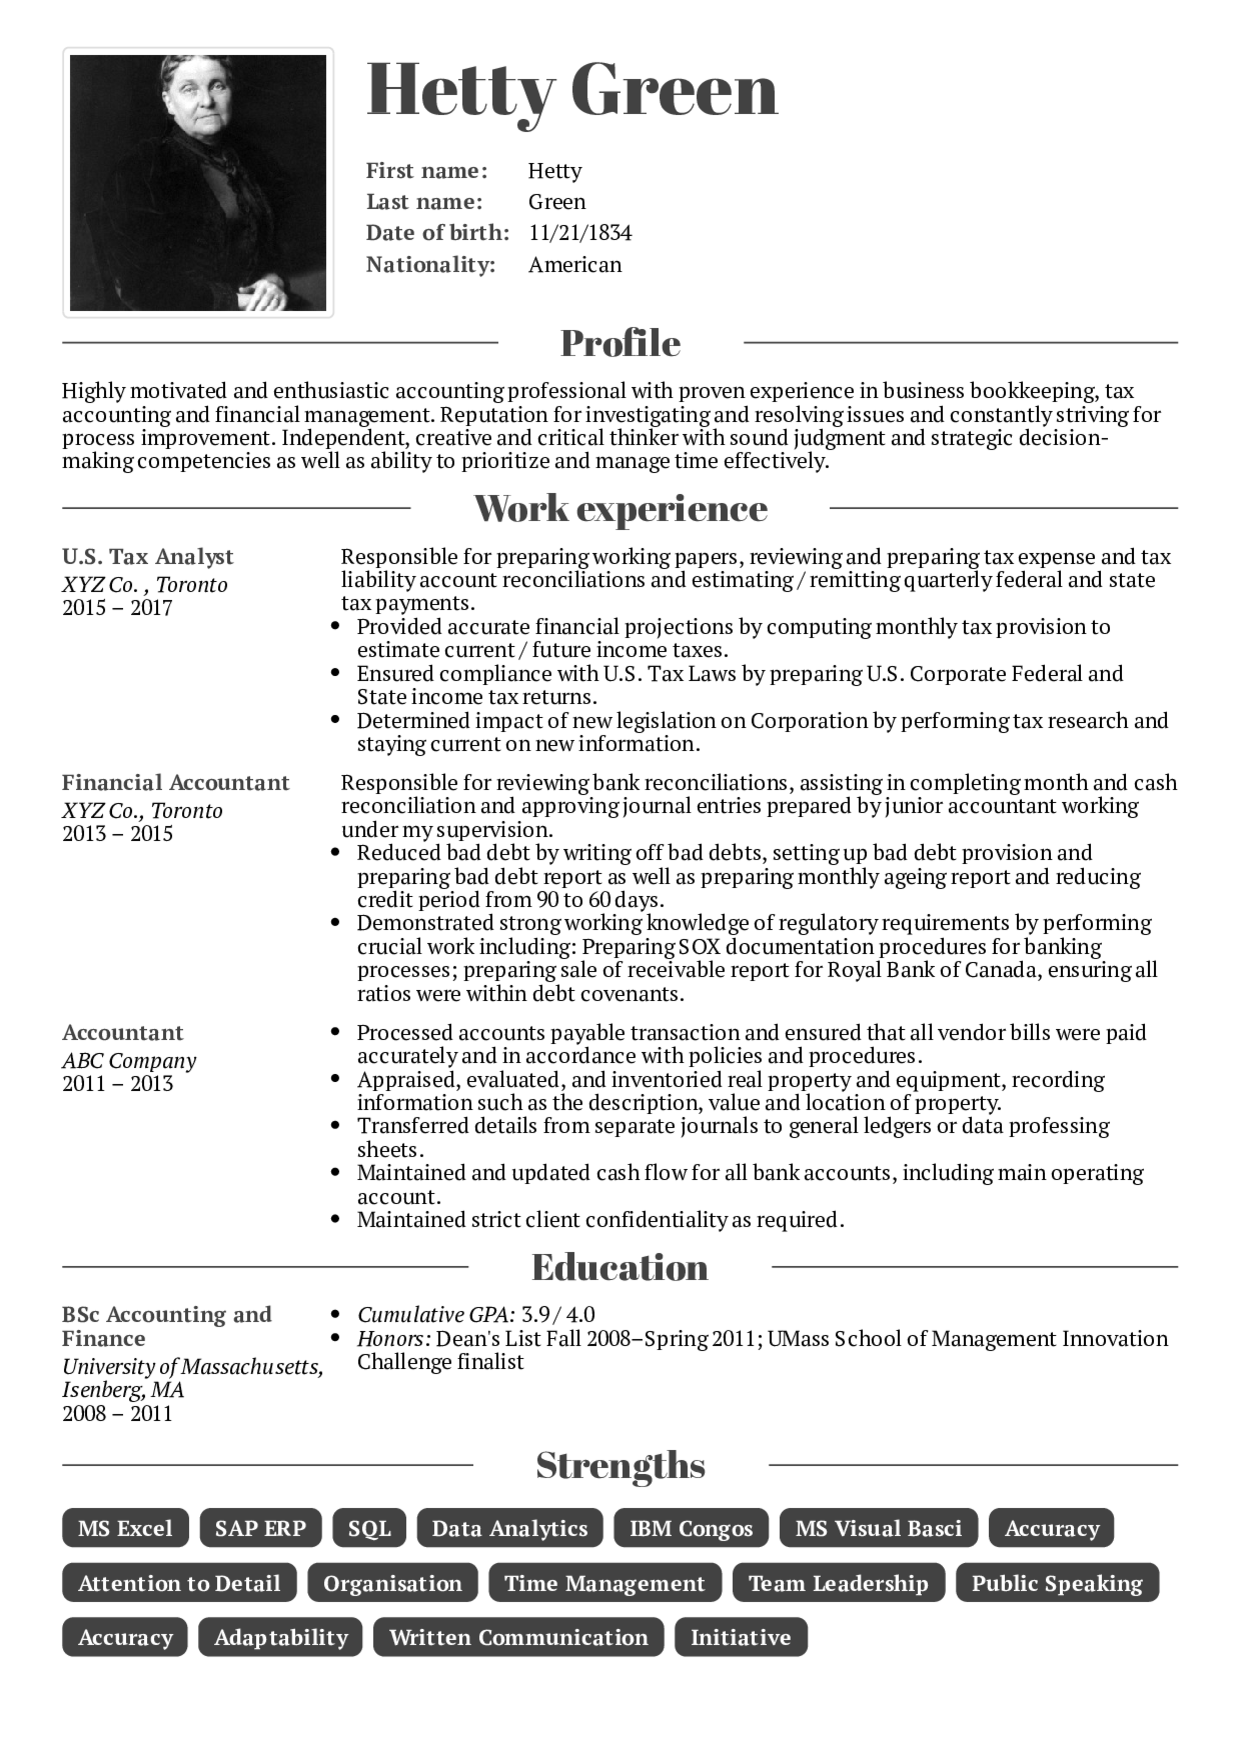 Professional Resume Examples Image professional resume examples|wikiresume.com